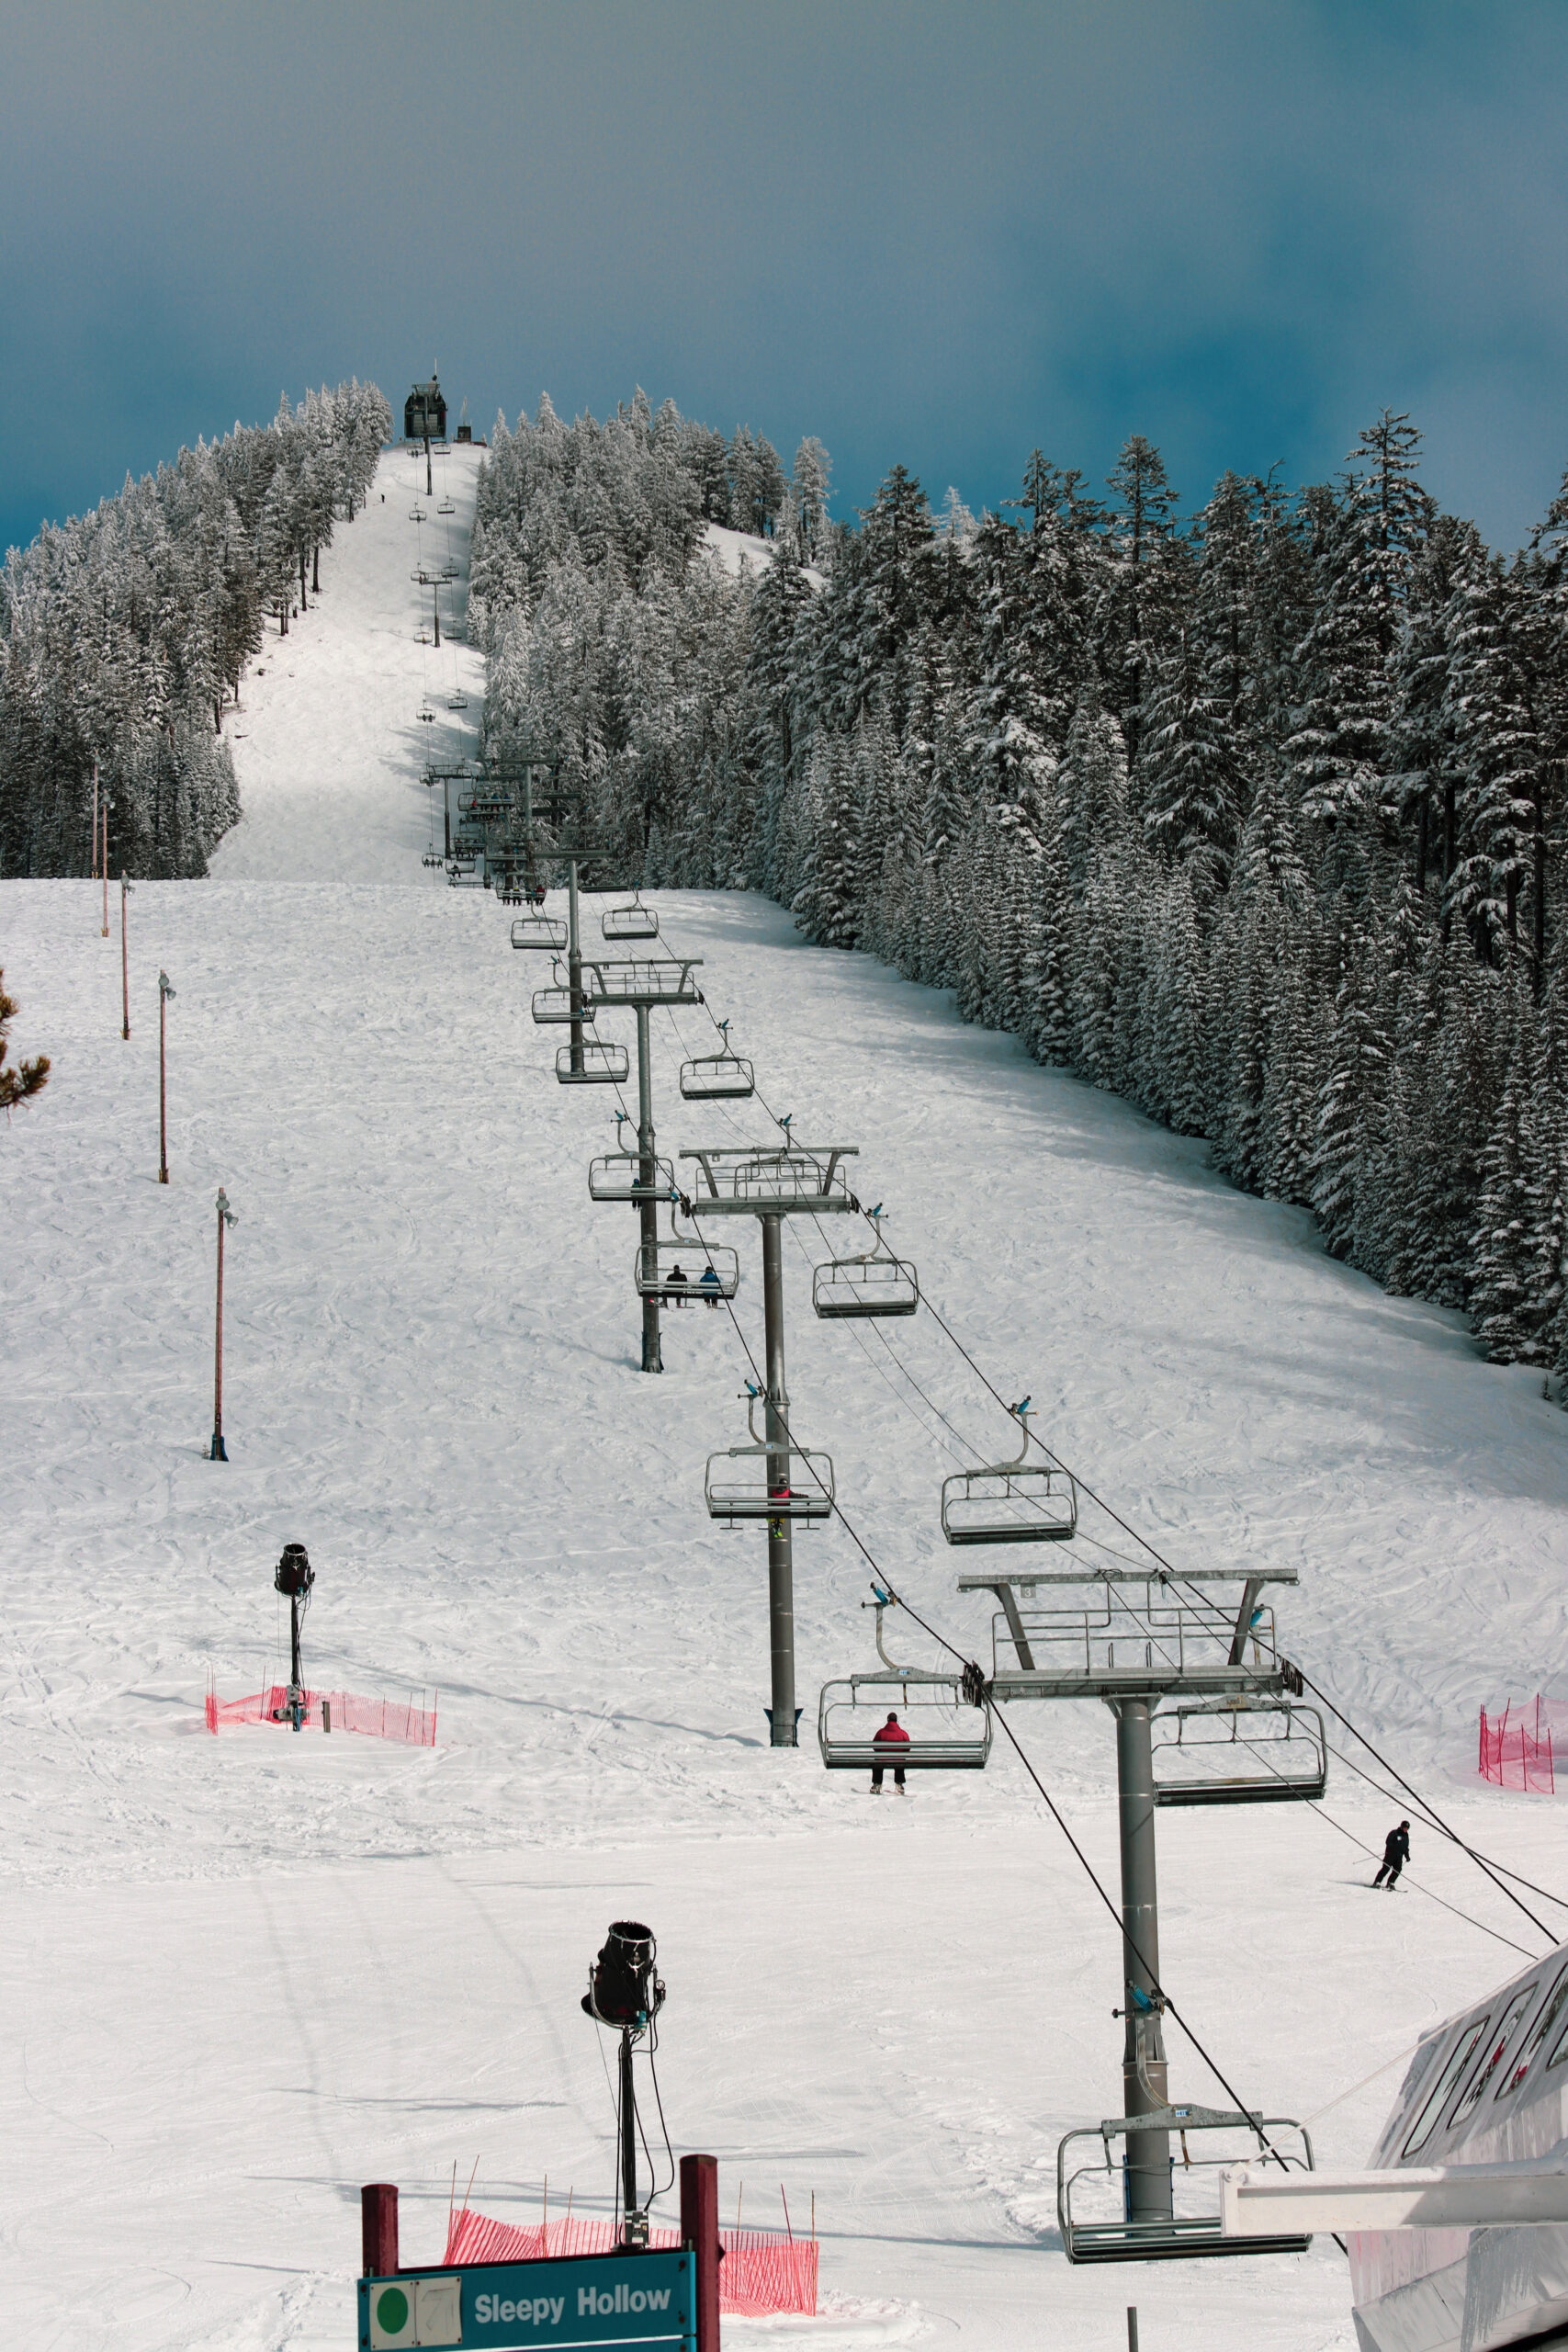 The Eagle Peak Accelerator lift at Willamette Pass Resort is the biggest and fastest chair in the state